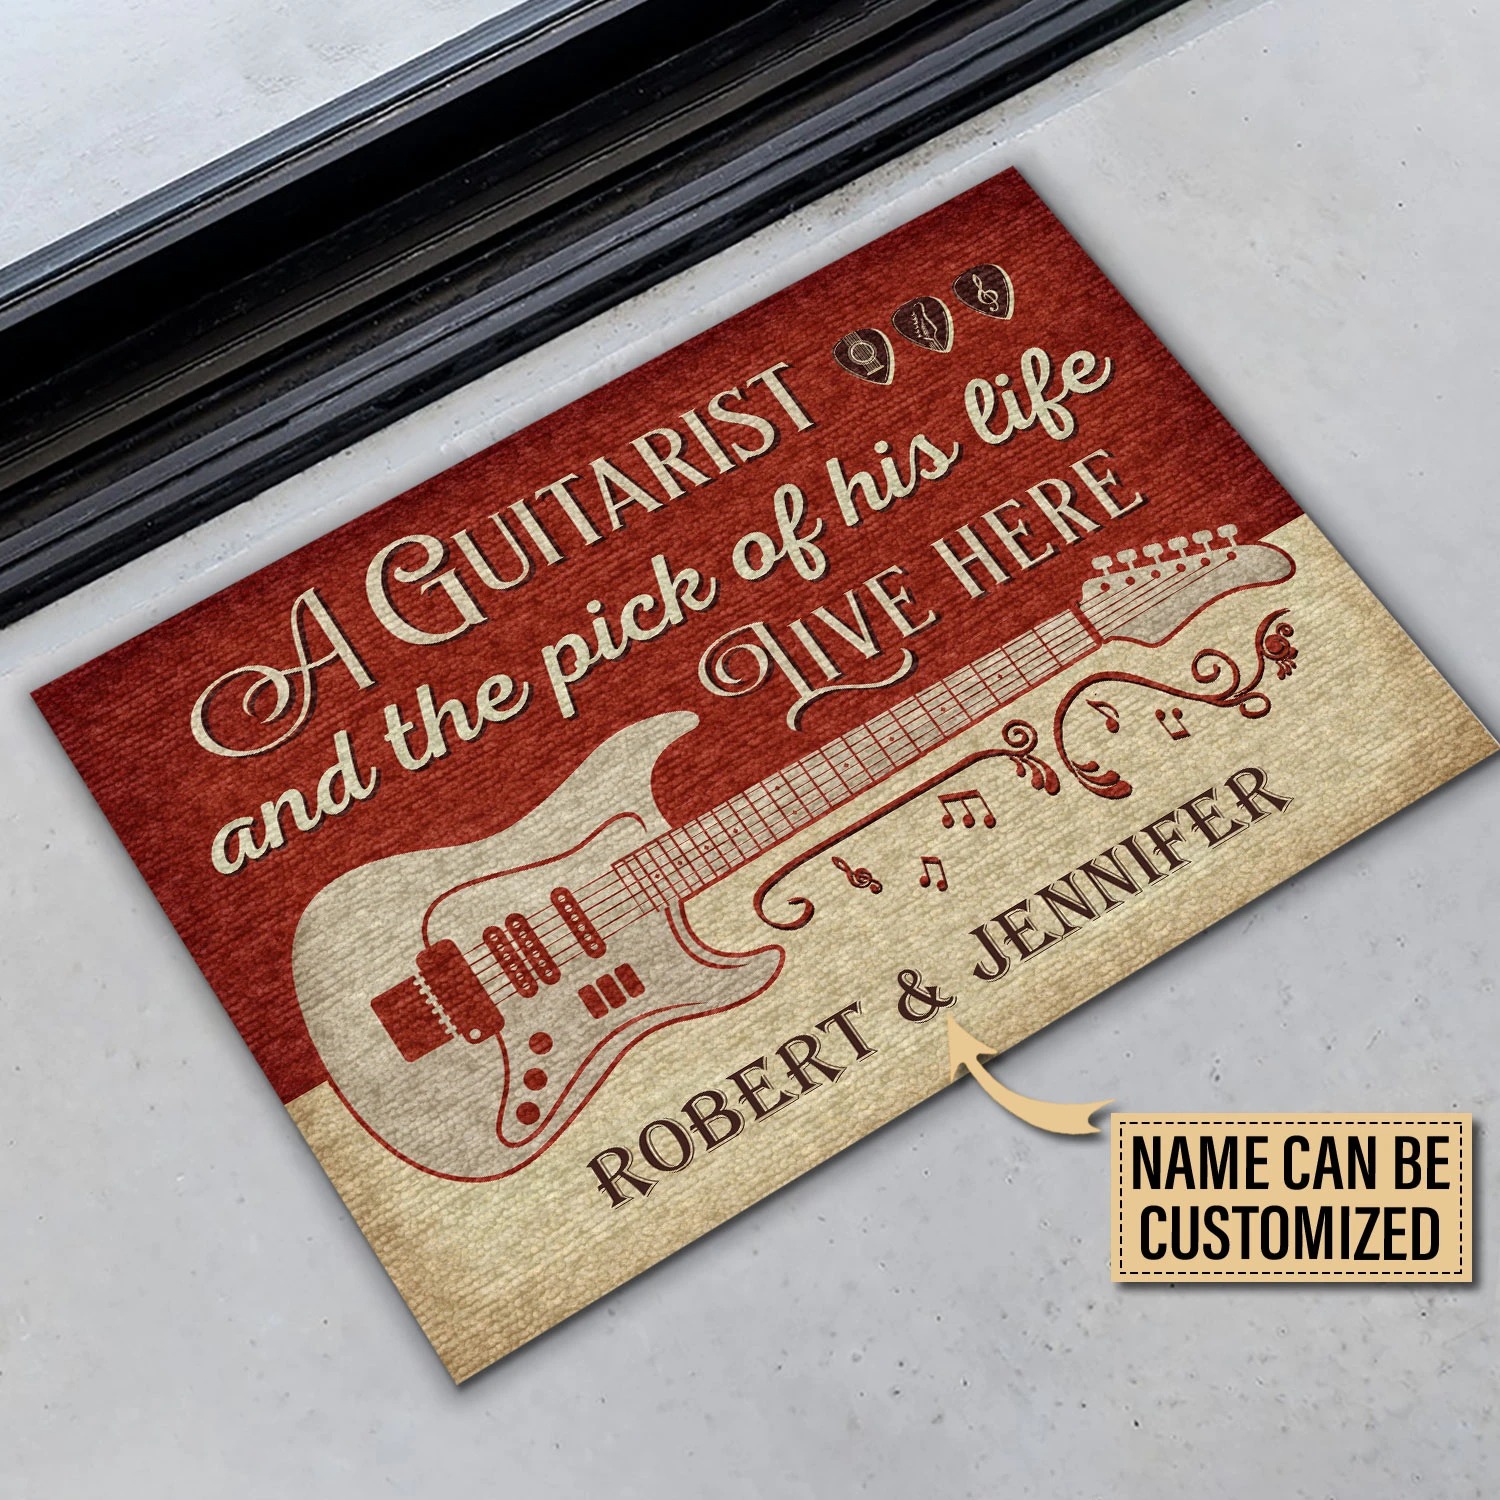 Personalized A guitarist and the pick of his life live here custom name doormat 2